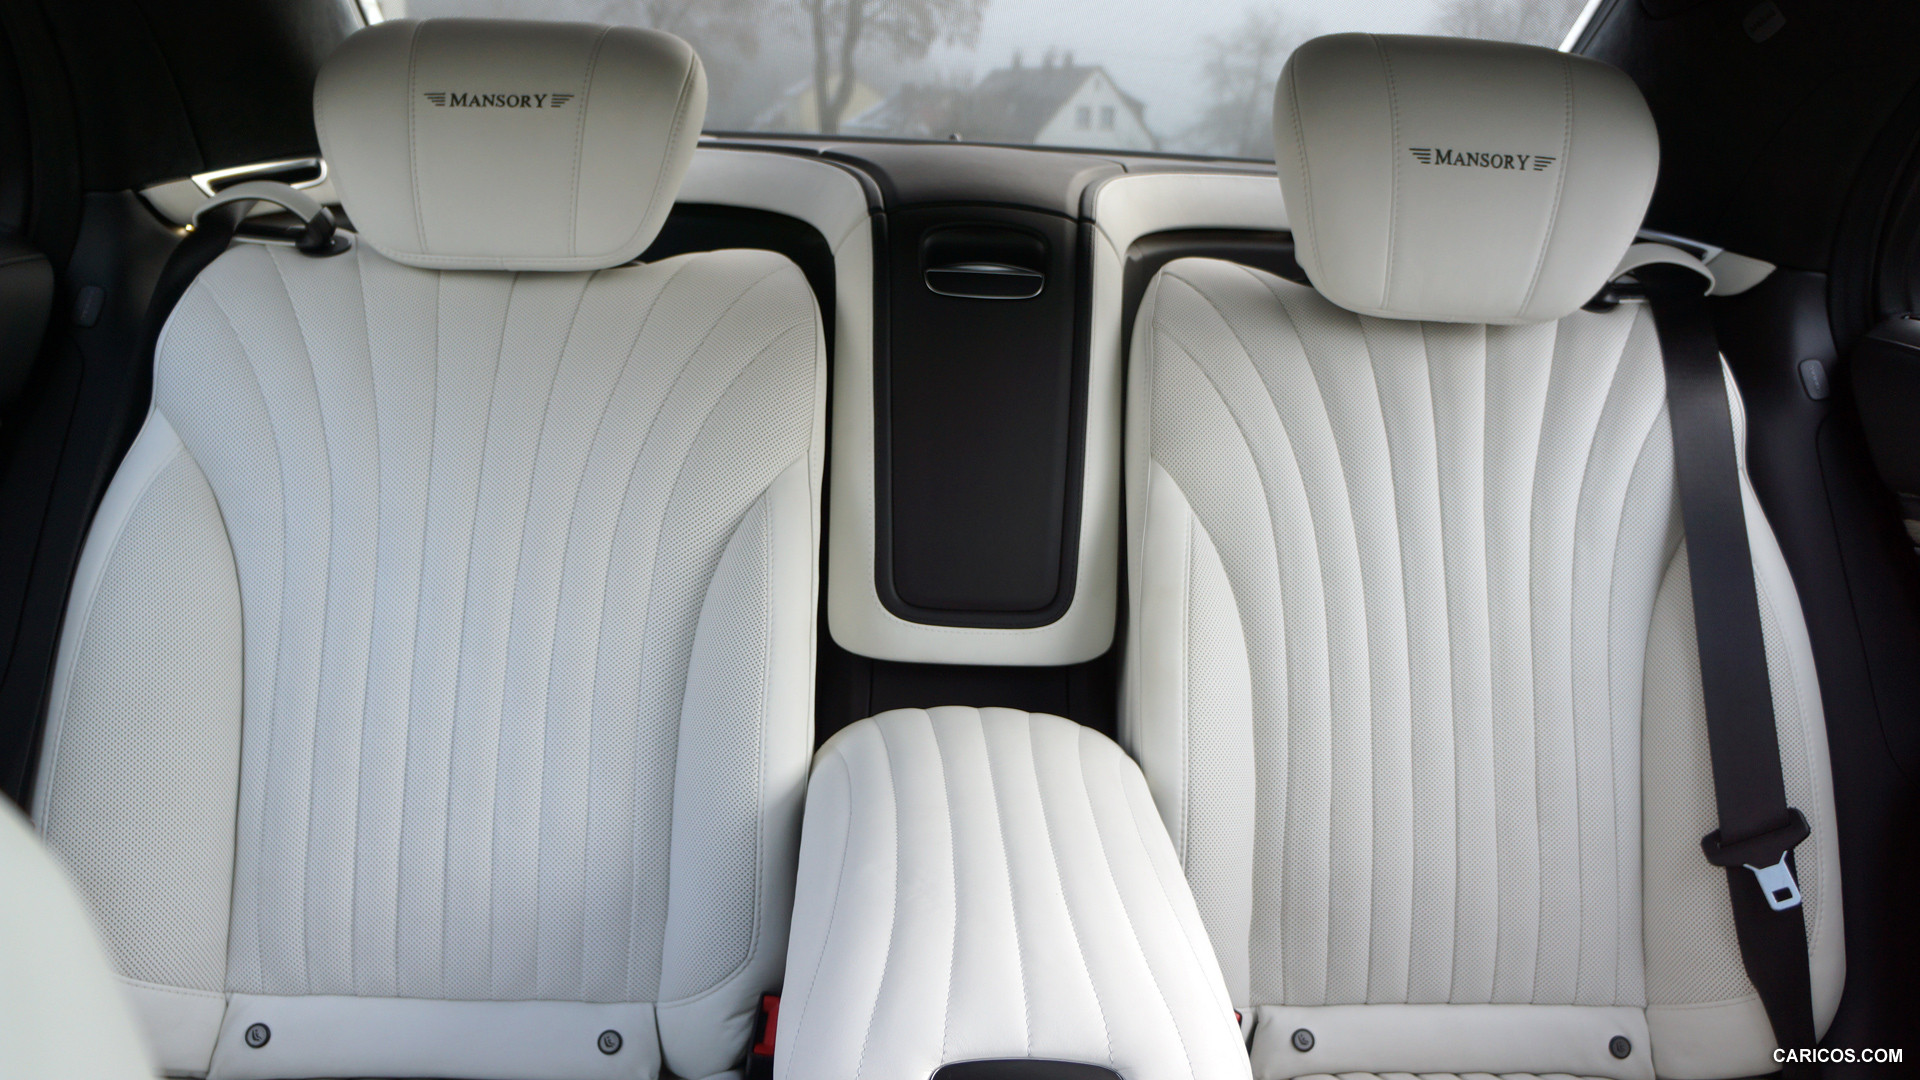 2015 Mansory Mercedes-Benz S63 AMG  - Interior Rear Seats, #16 of 17